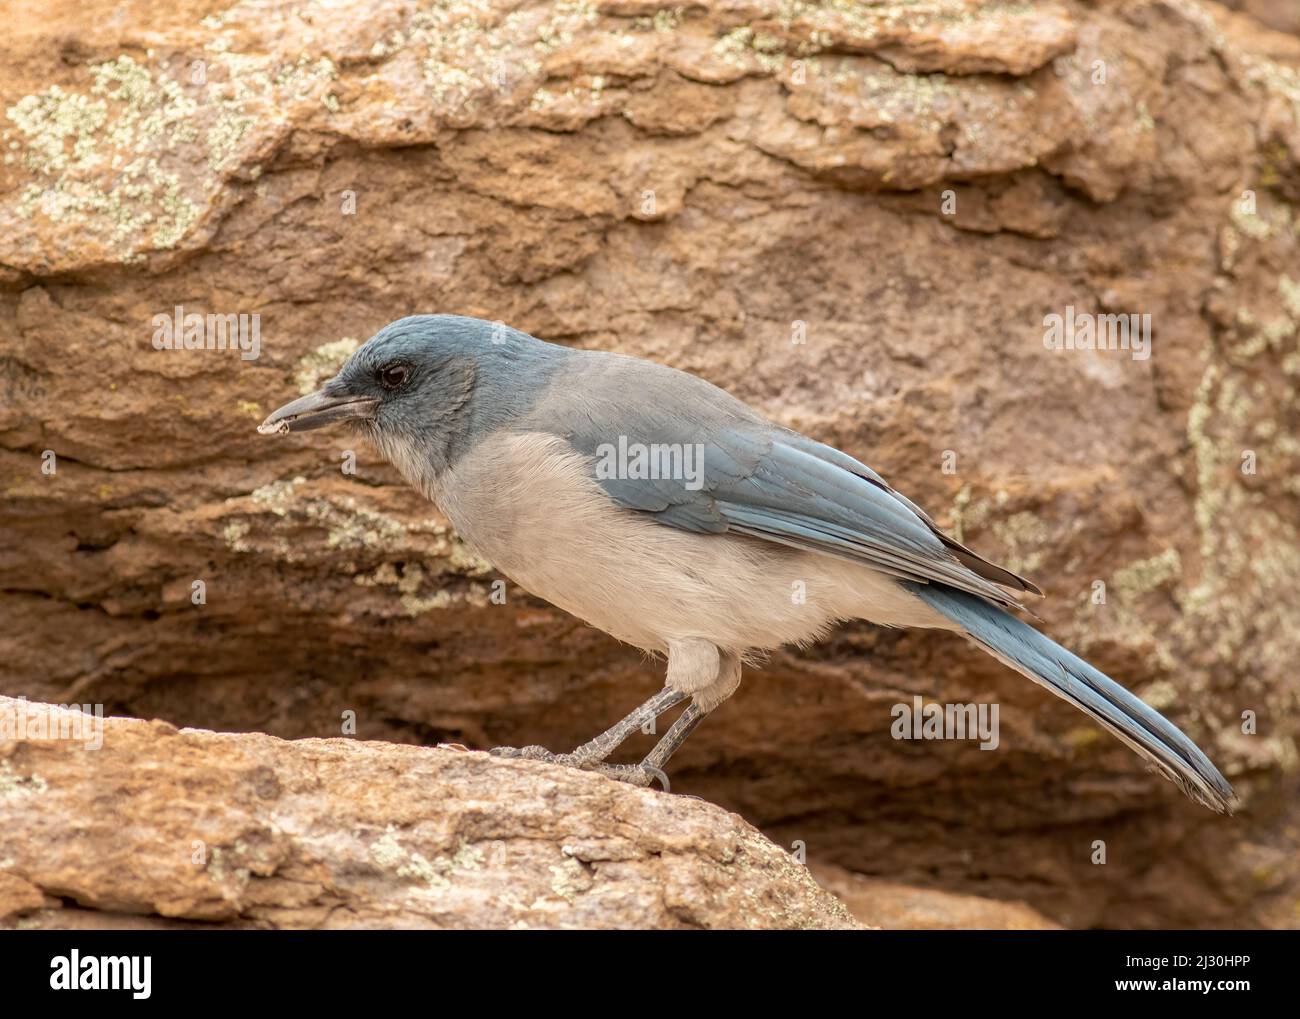 A mexican jay scavenging for food left behind by hikers and visitors of the Chiricahua Mountains in southern Arizona. Stock Photo